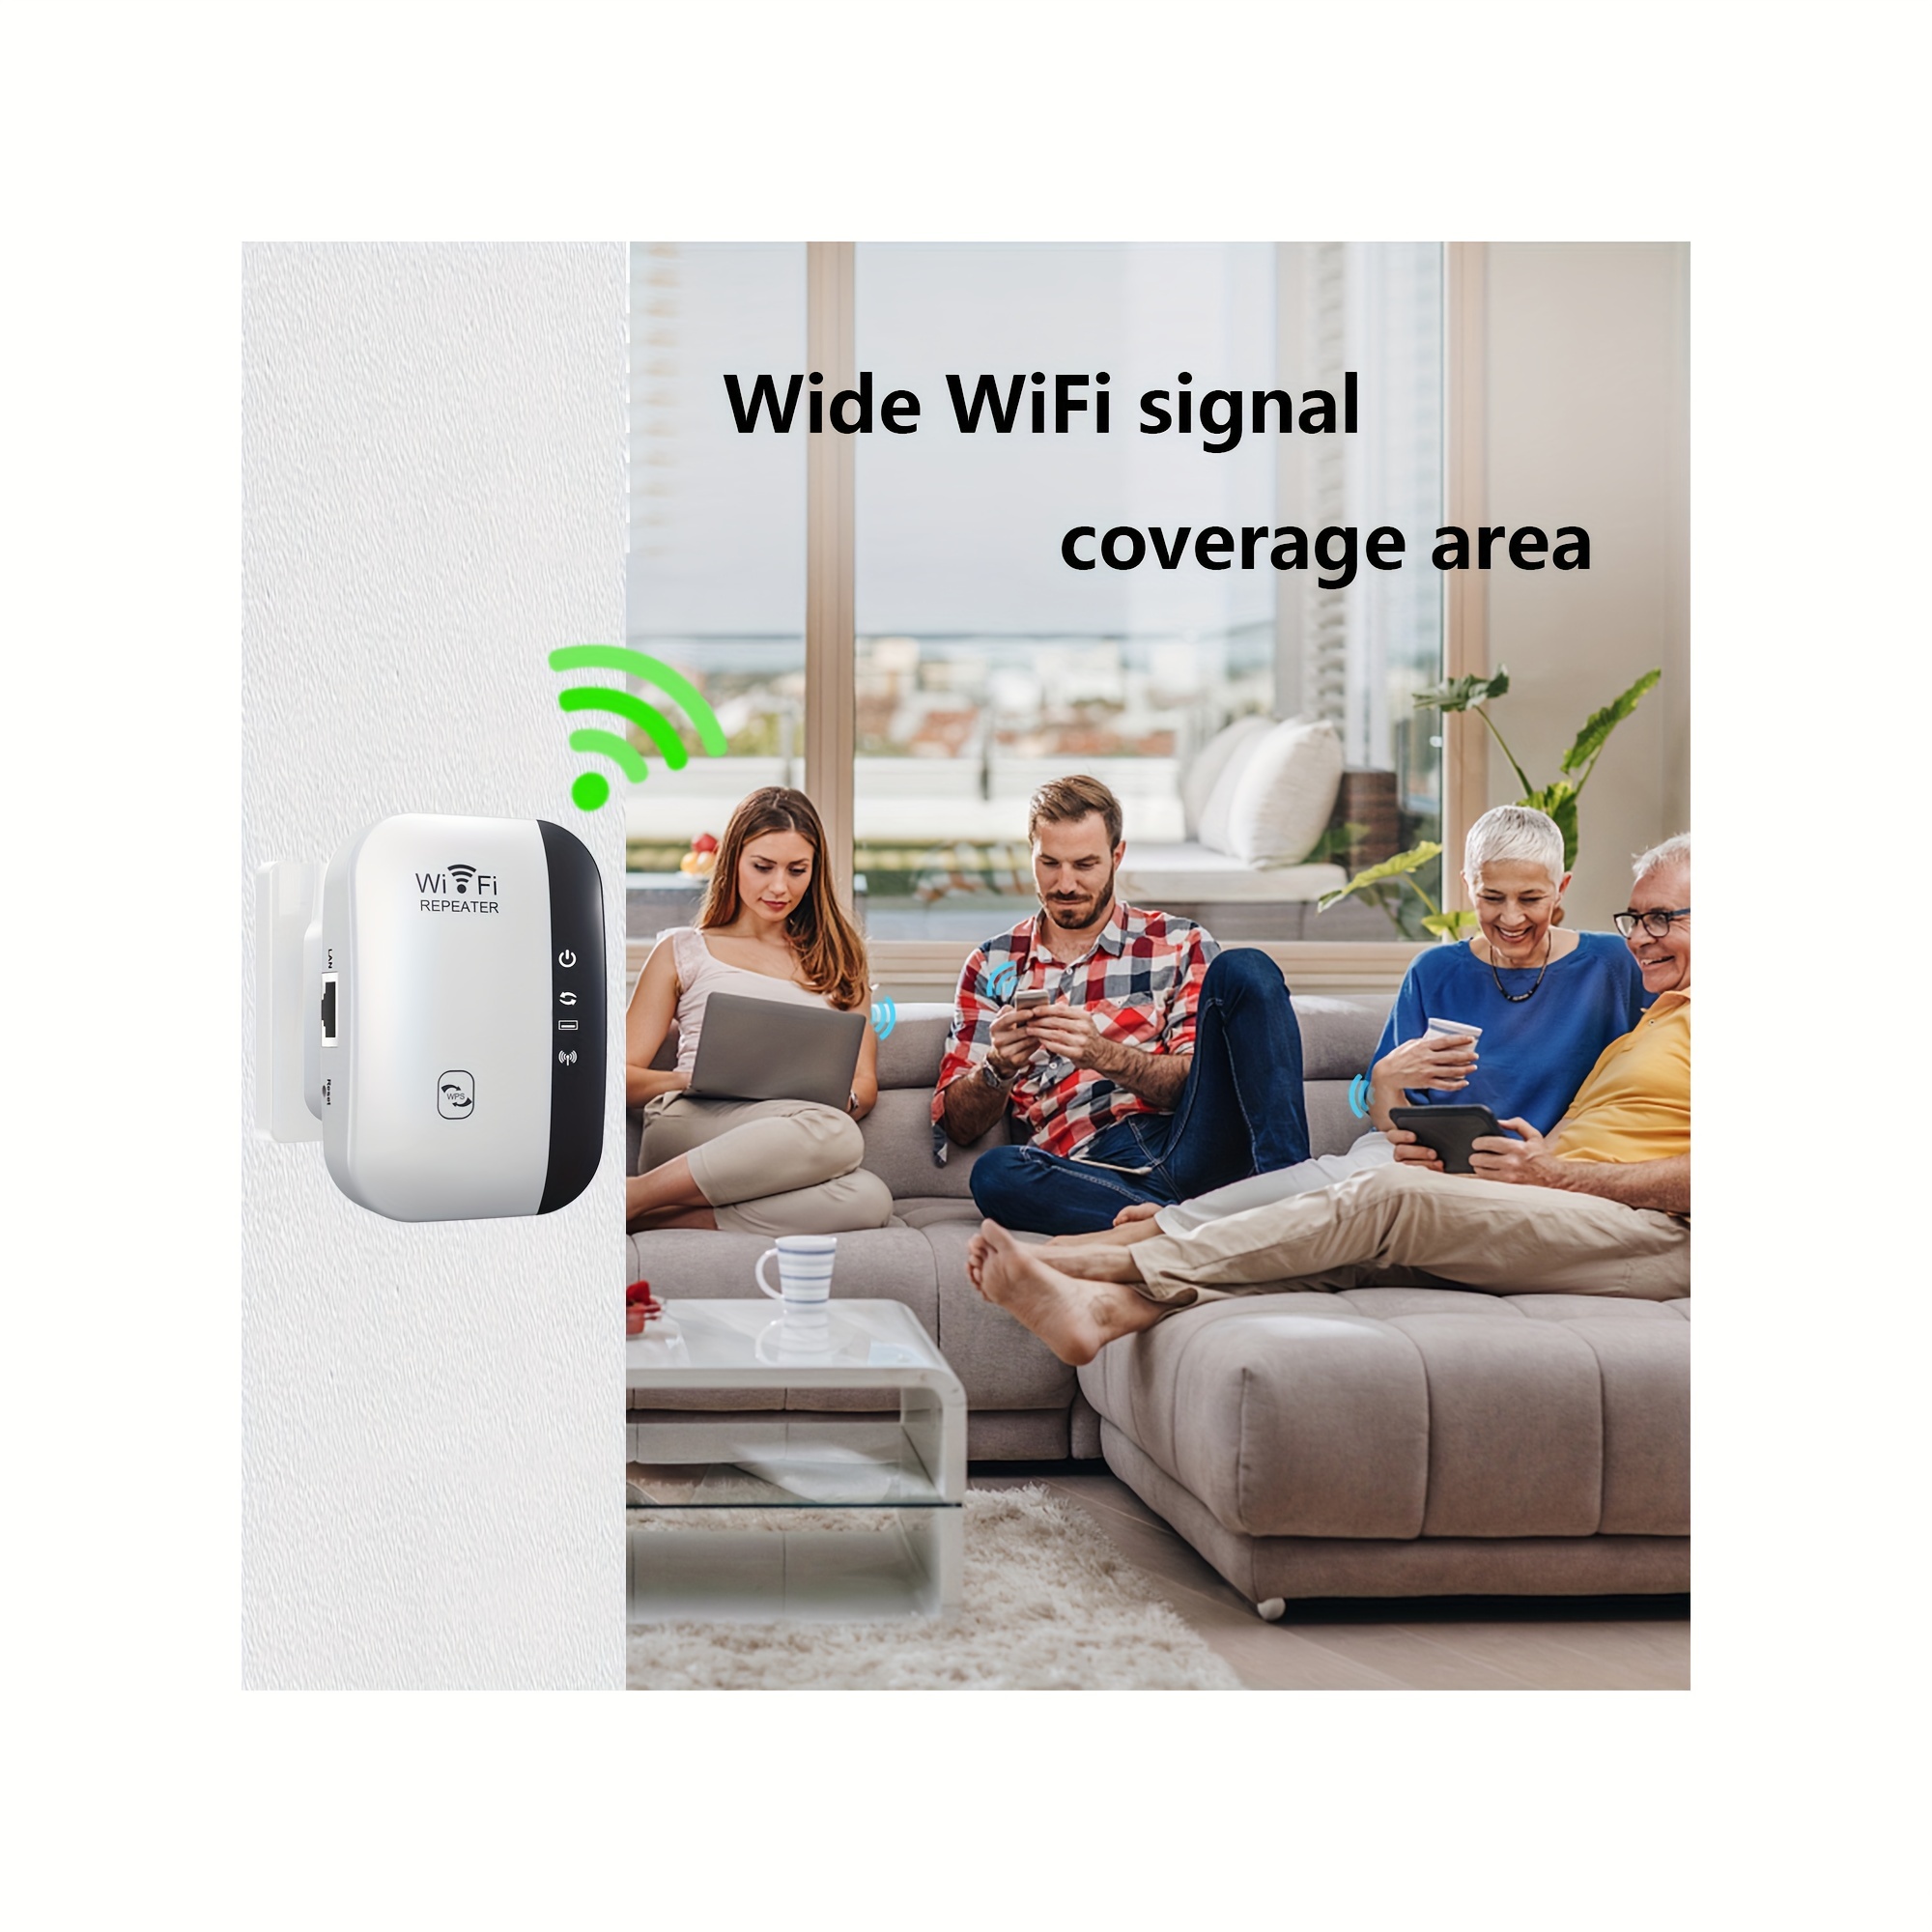 How to Extend Wireless Internet for Full Coverage in Large Homes